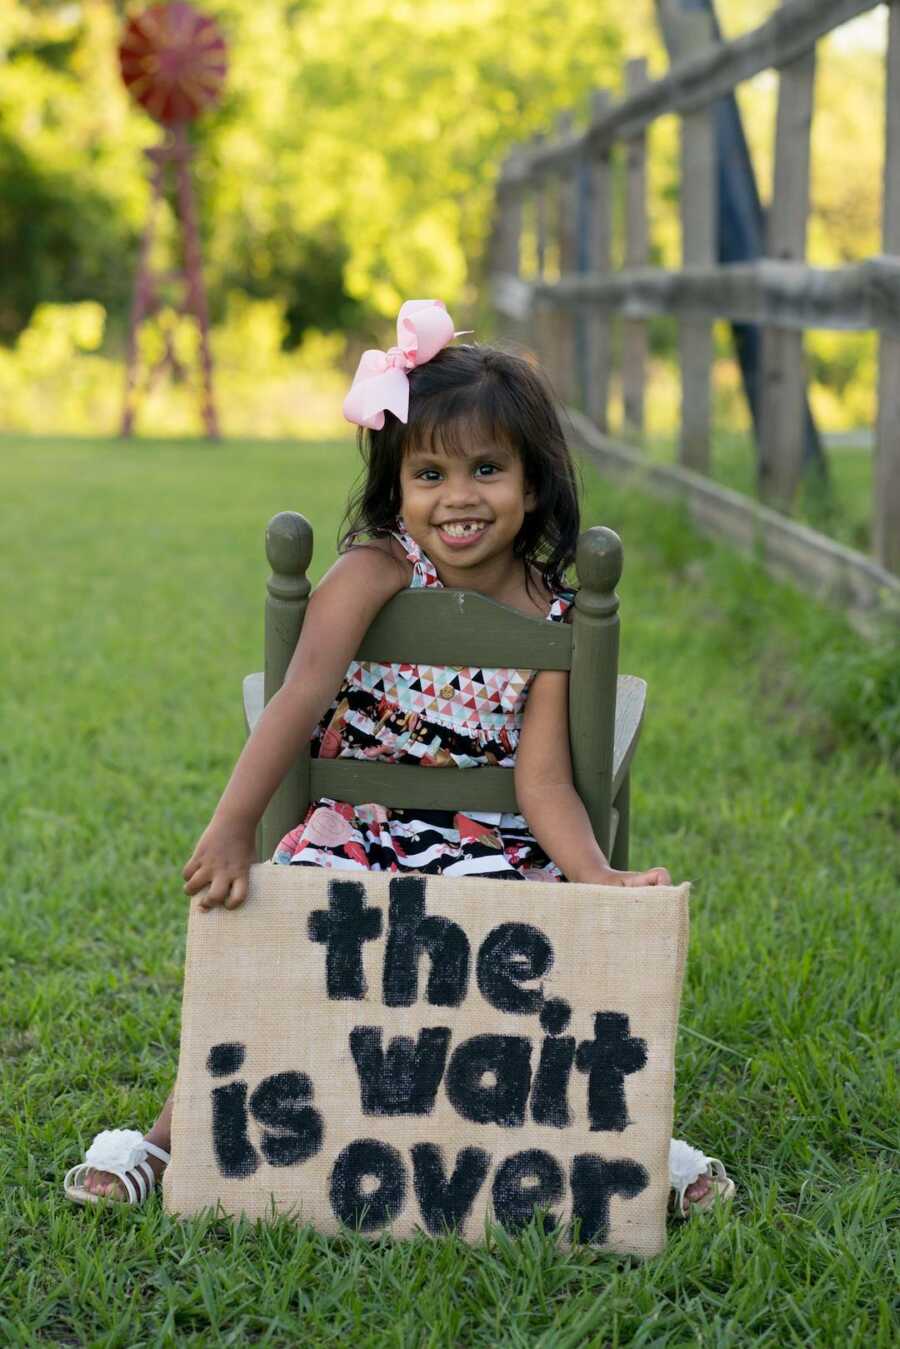 adopted daughter holds adoption announcement sign saying "the wait is over"